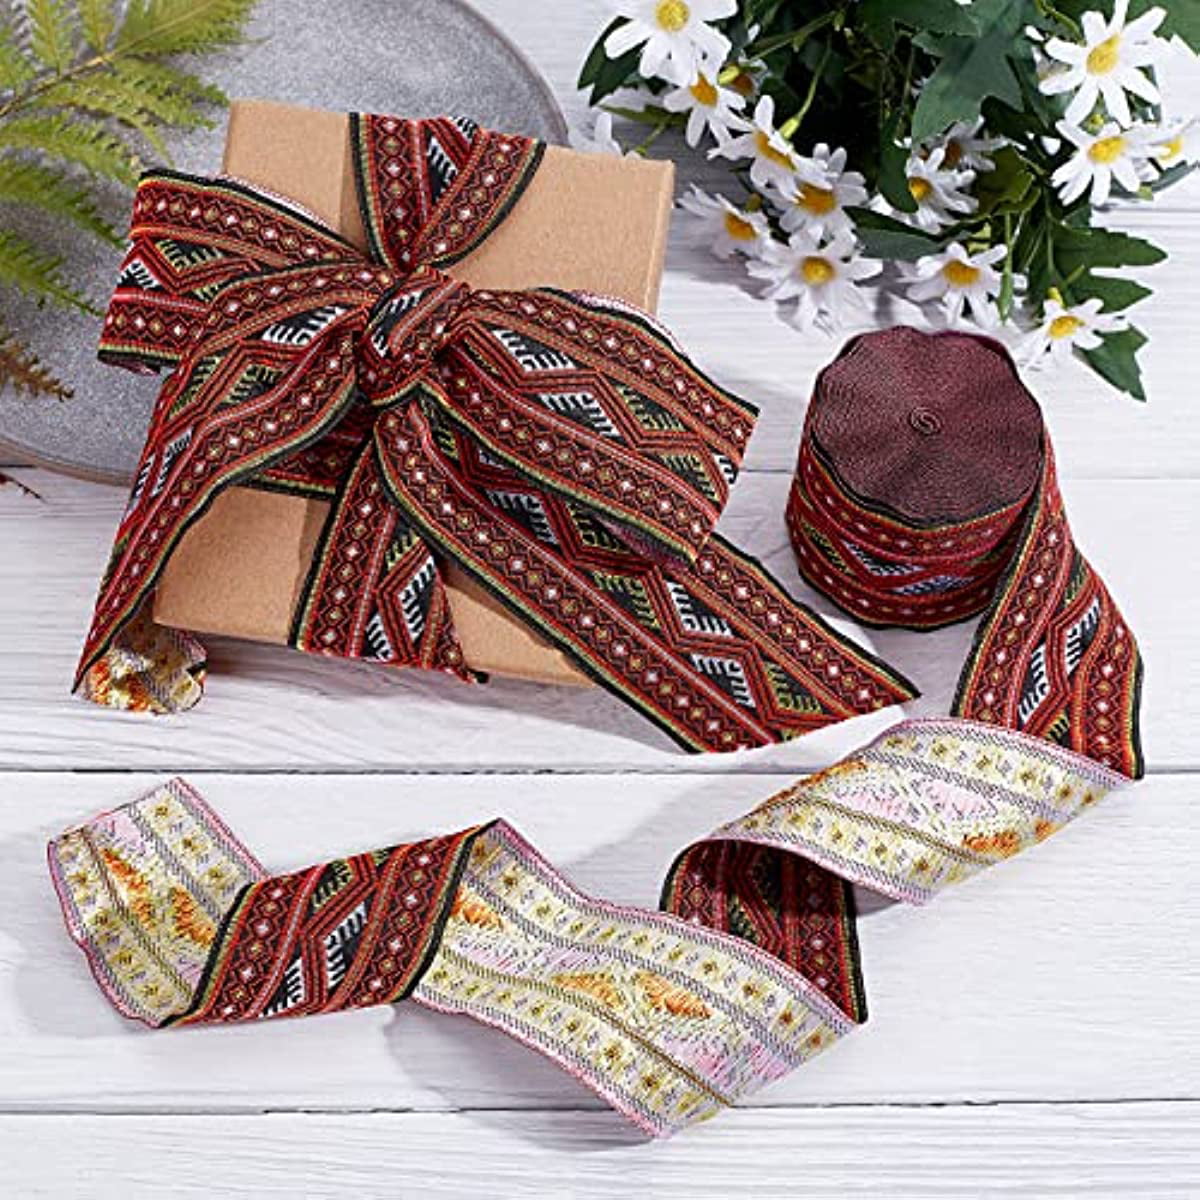 7 Yards 2 Sunflower Jacquard Ribbon Floral Embroidered Woven Trim Vintage Fabric Bias Tape for Home Decor Embellishment (White)